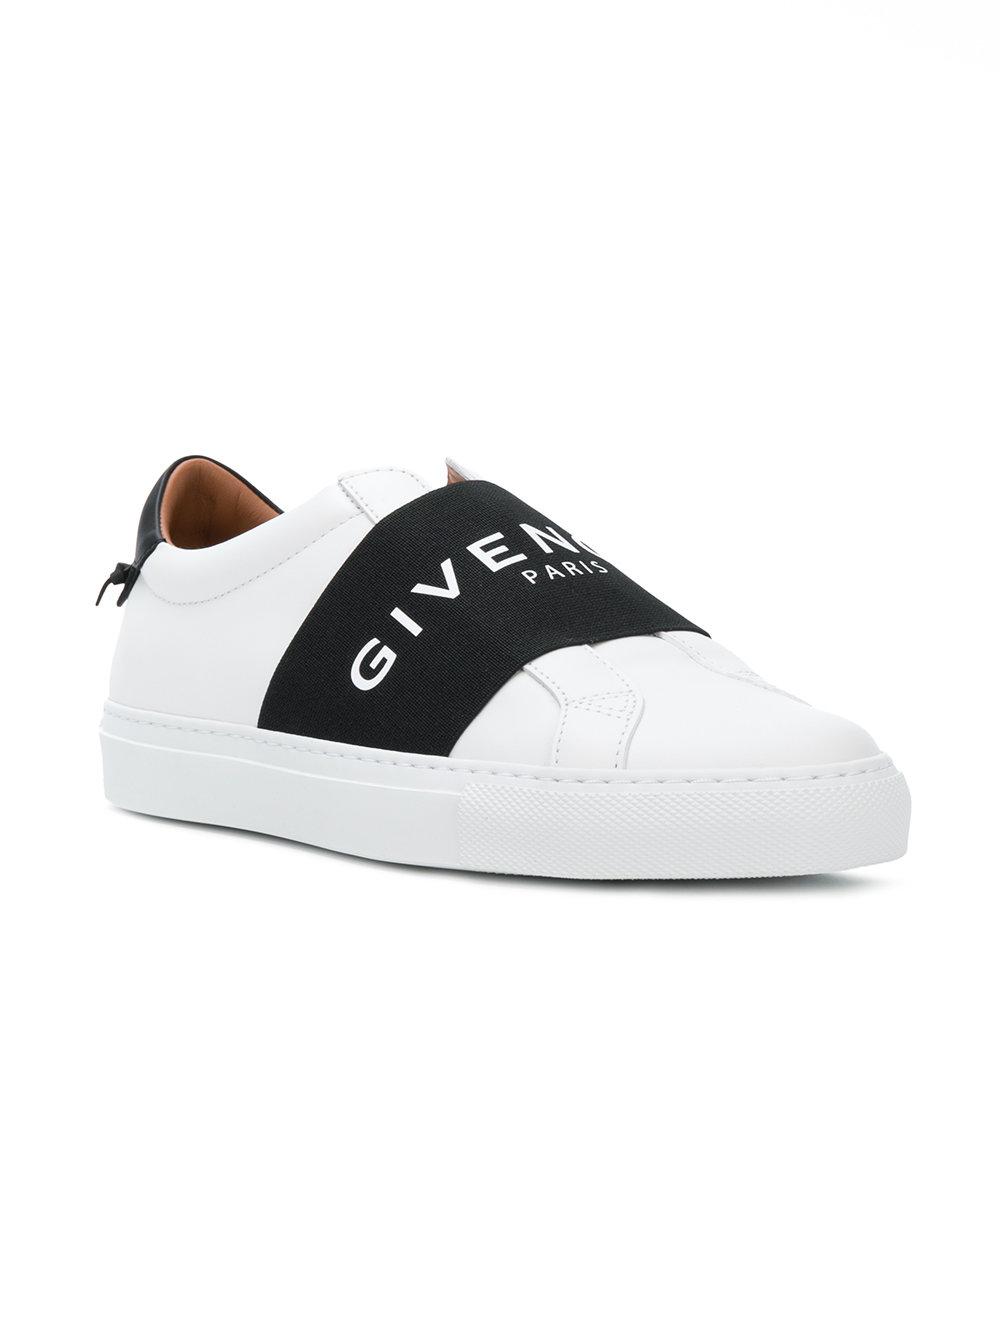 Givenchy Leather Logo Strap Sneakers in White - Lyst